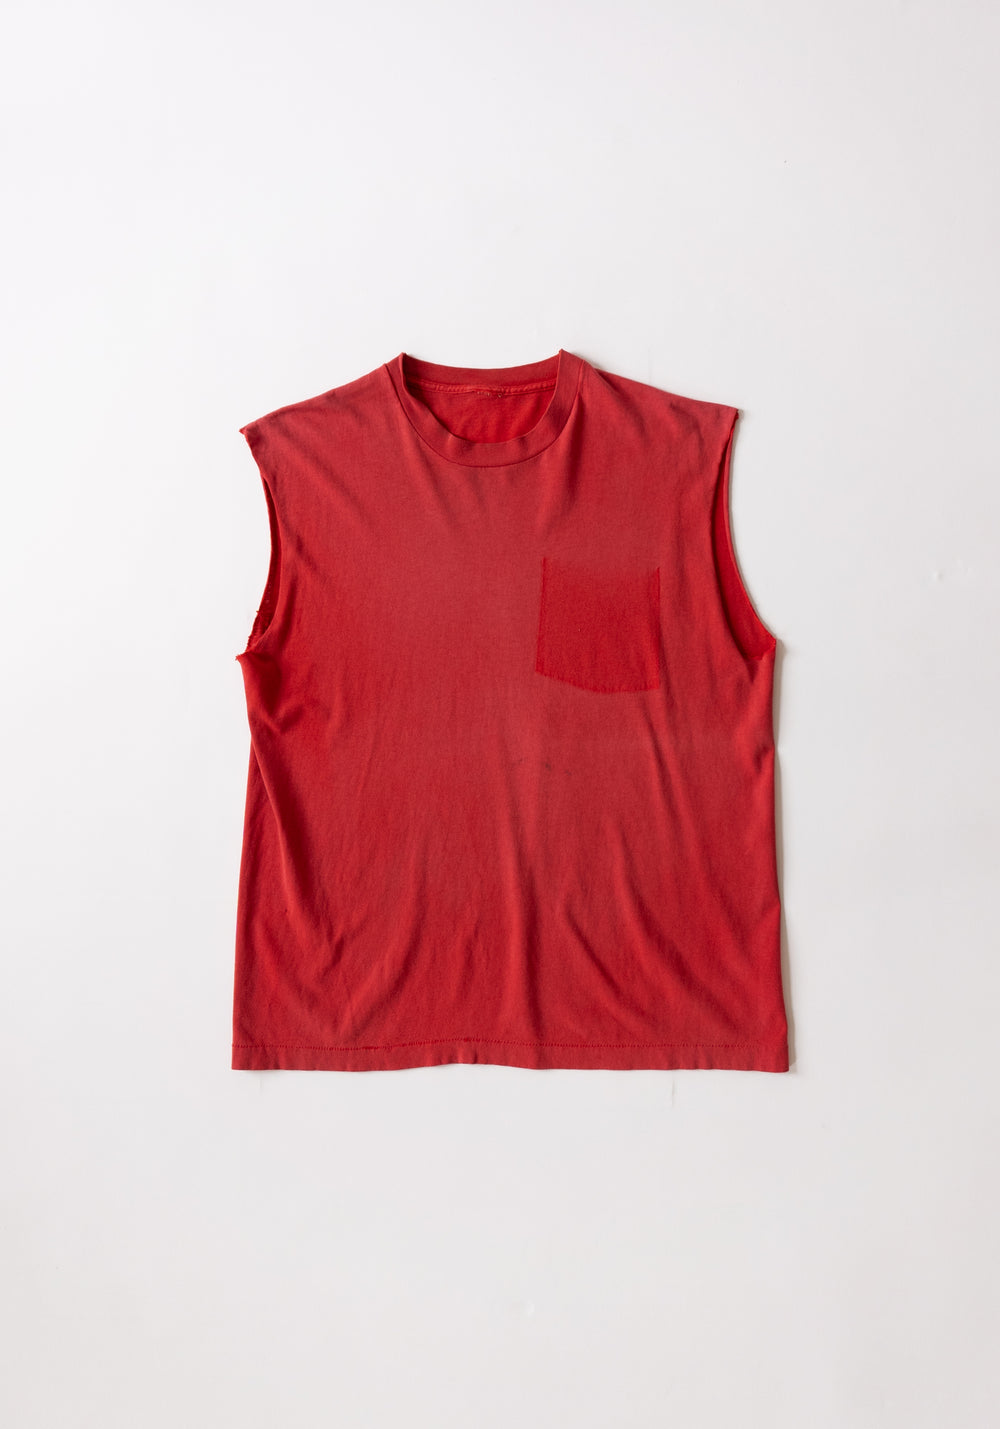 Vintage Faded Red Muscle Tank